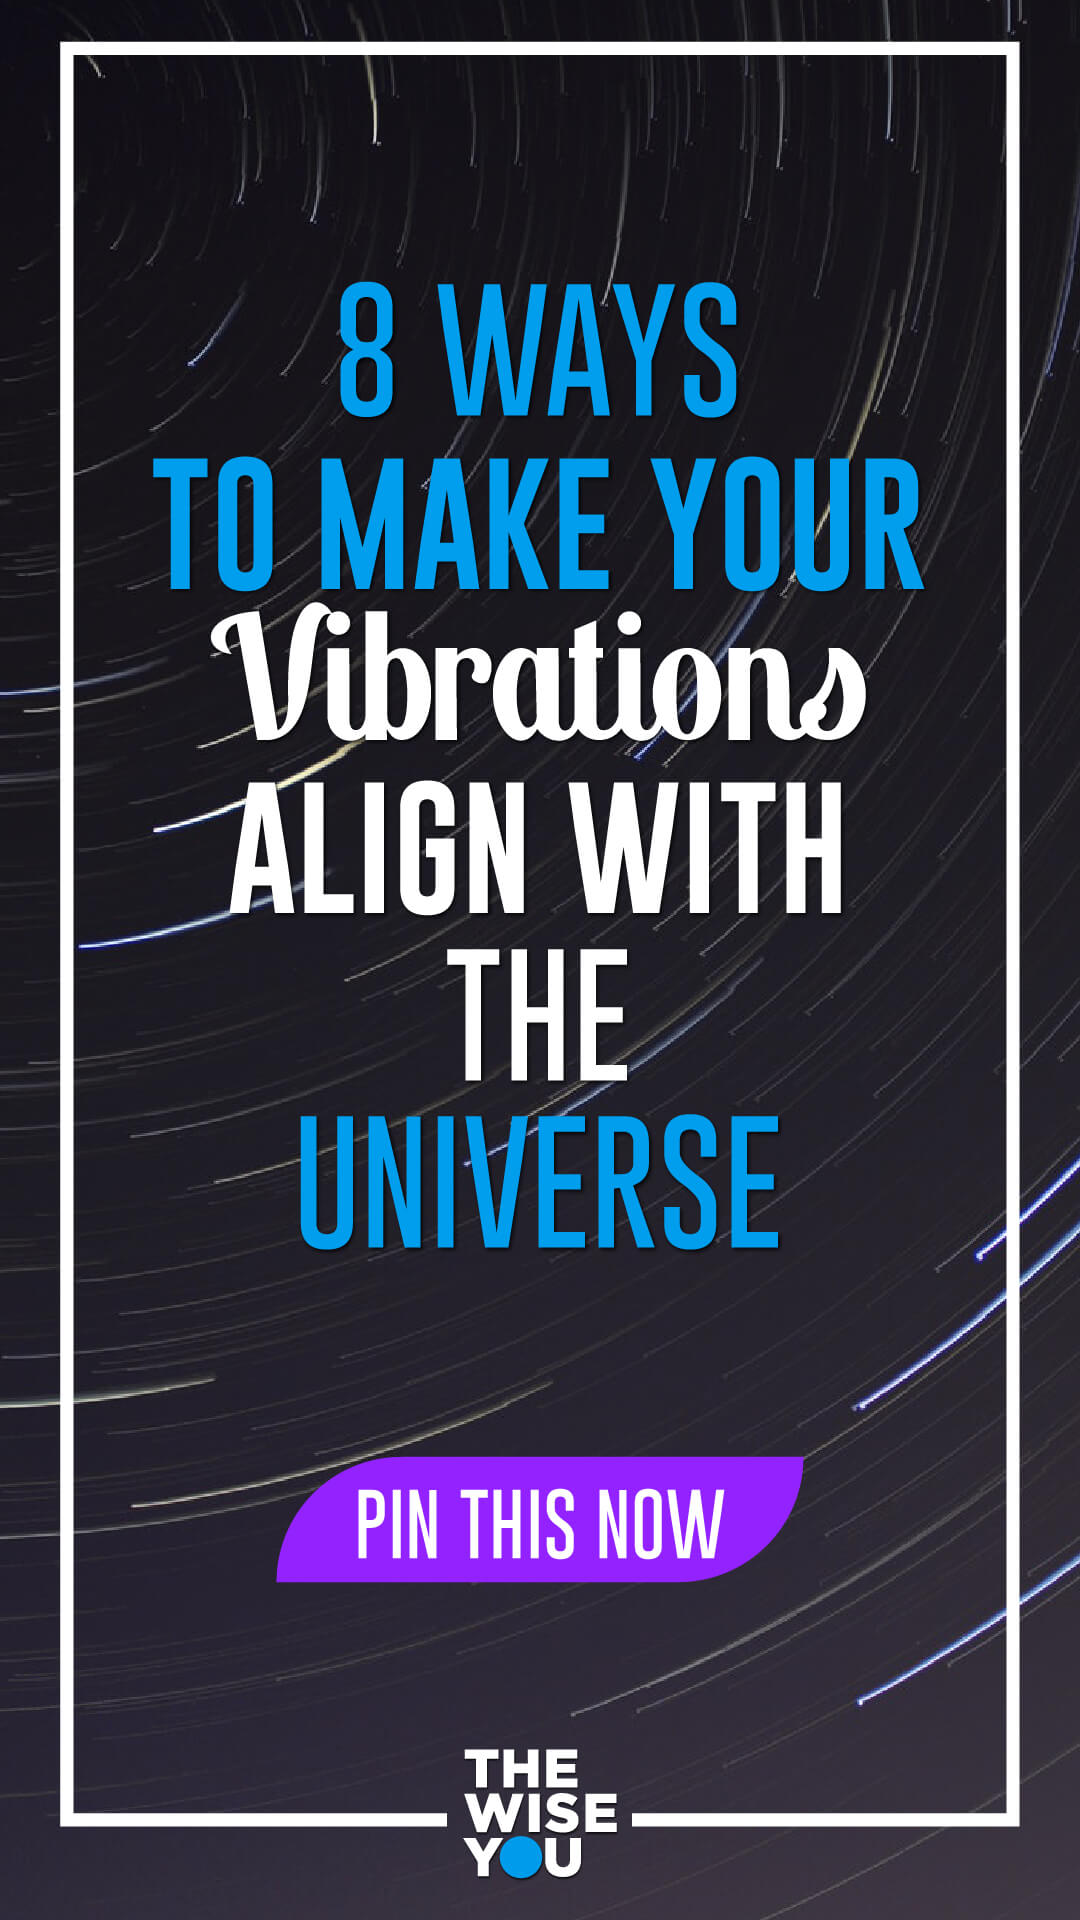 8 Ways To Make Your Vibrations Align With The Universe